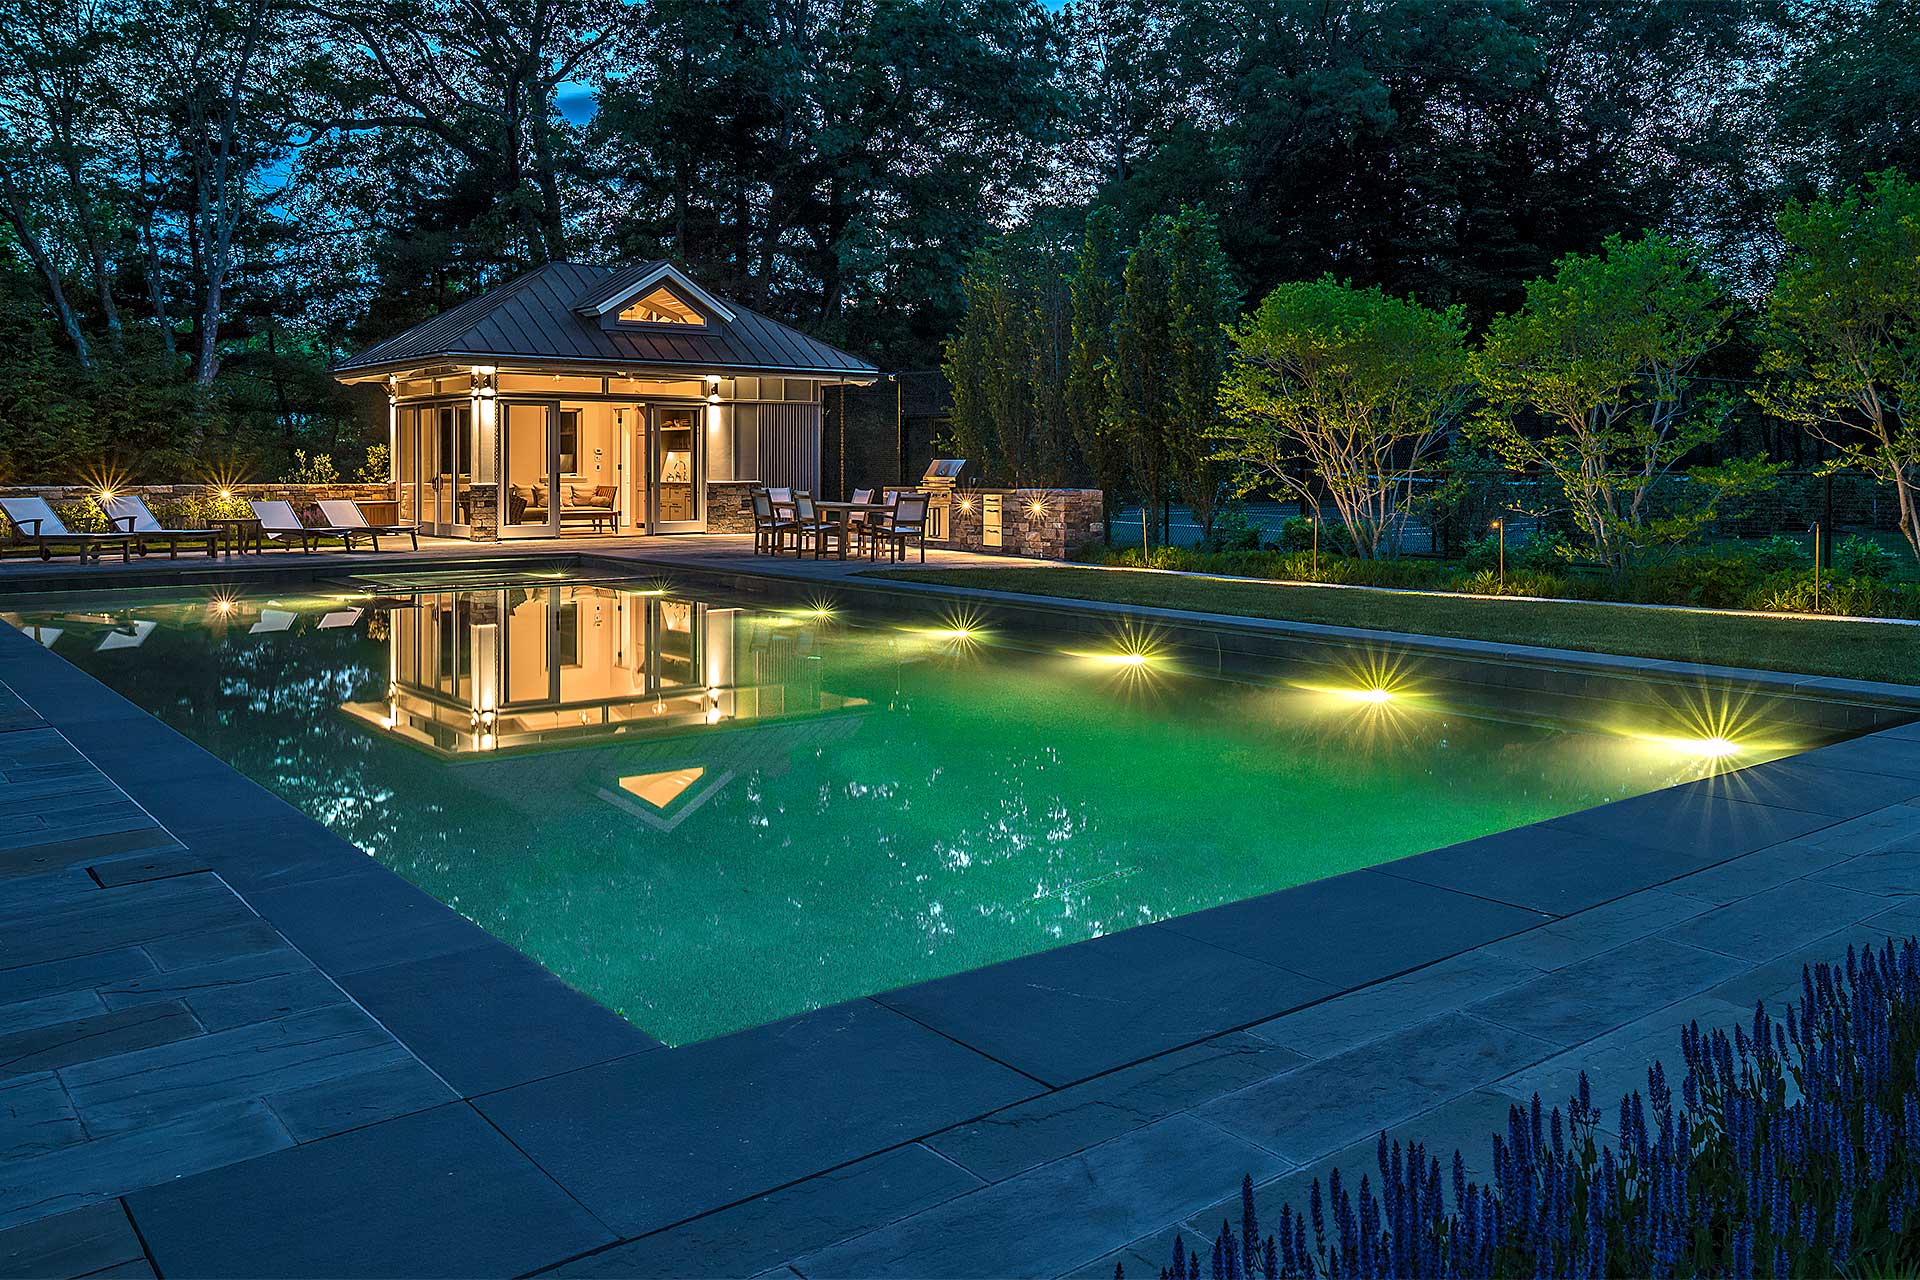 A lovely pool house in Concord, Massachusetts.